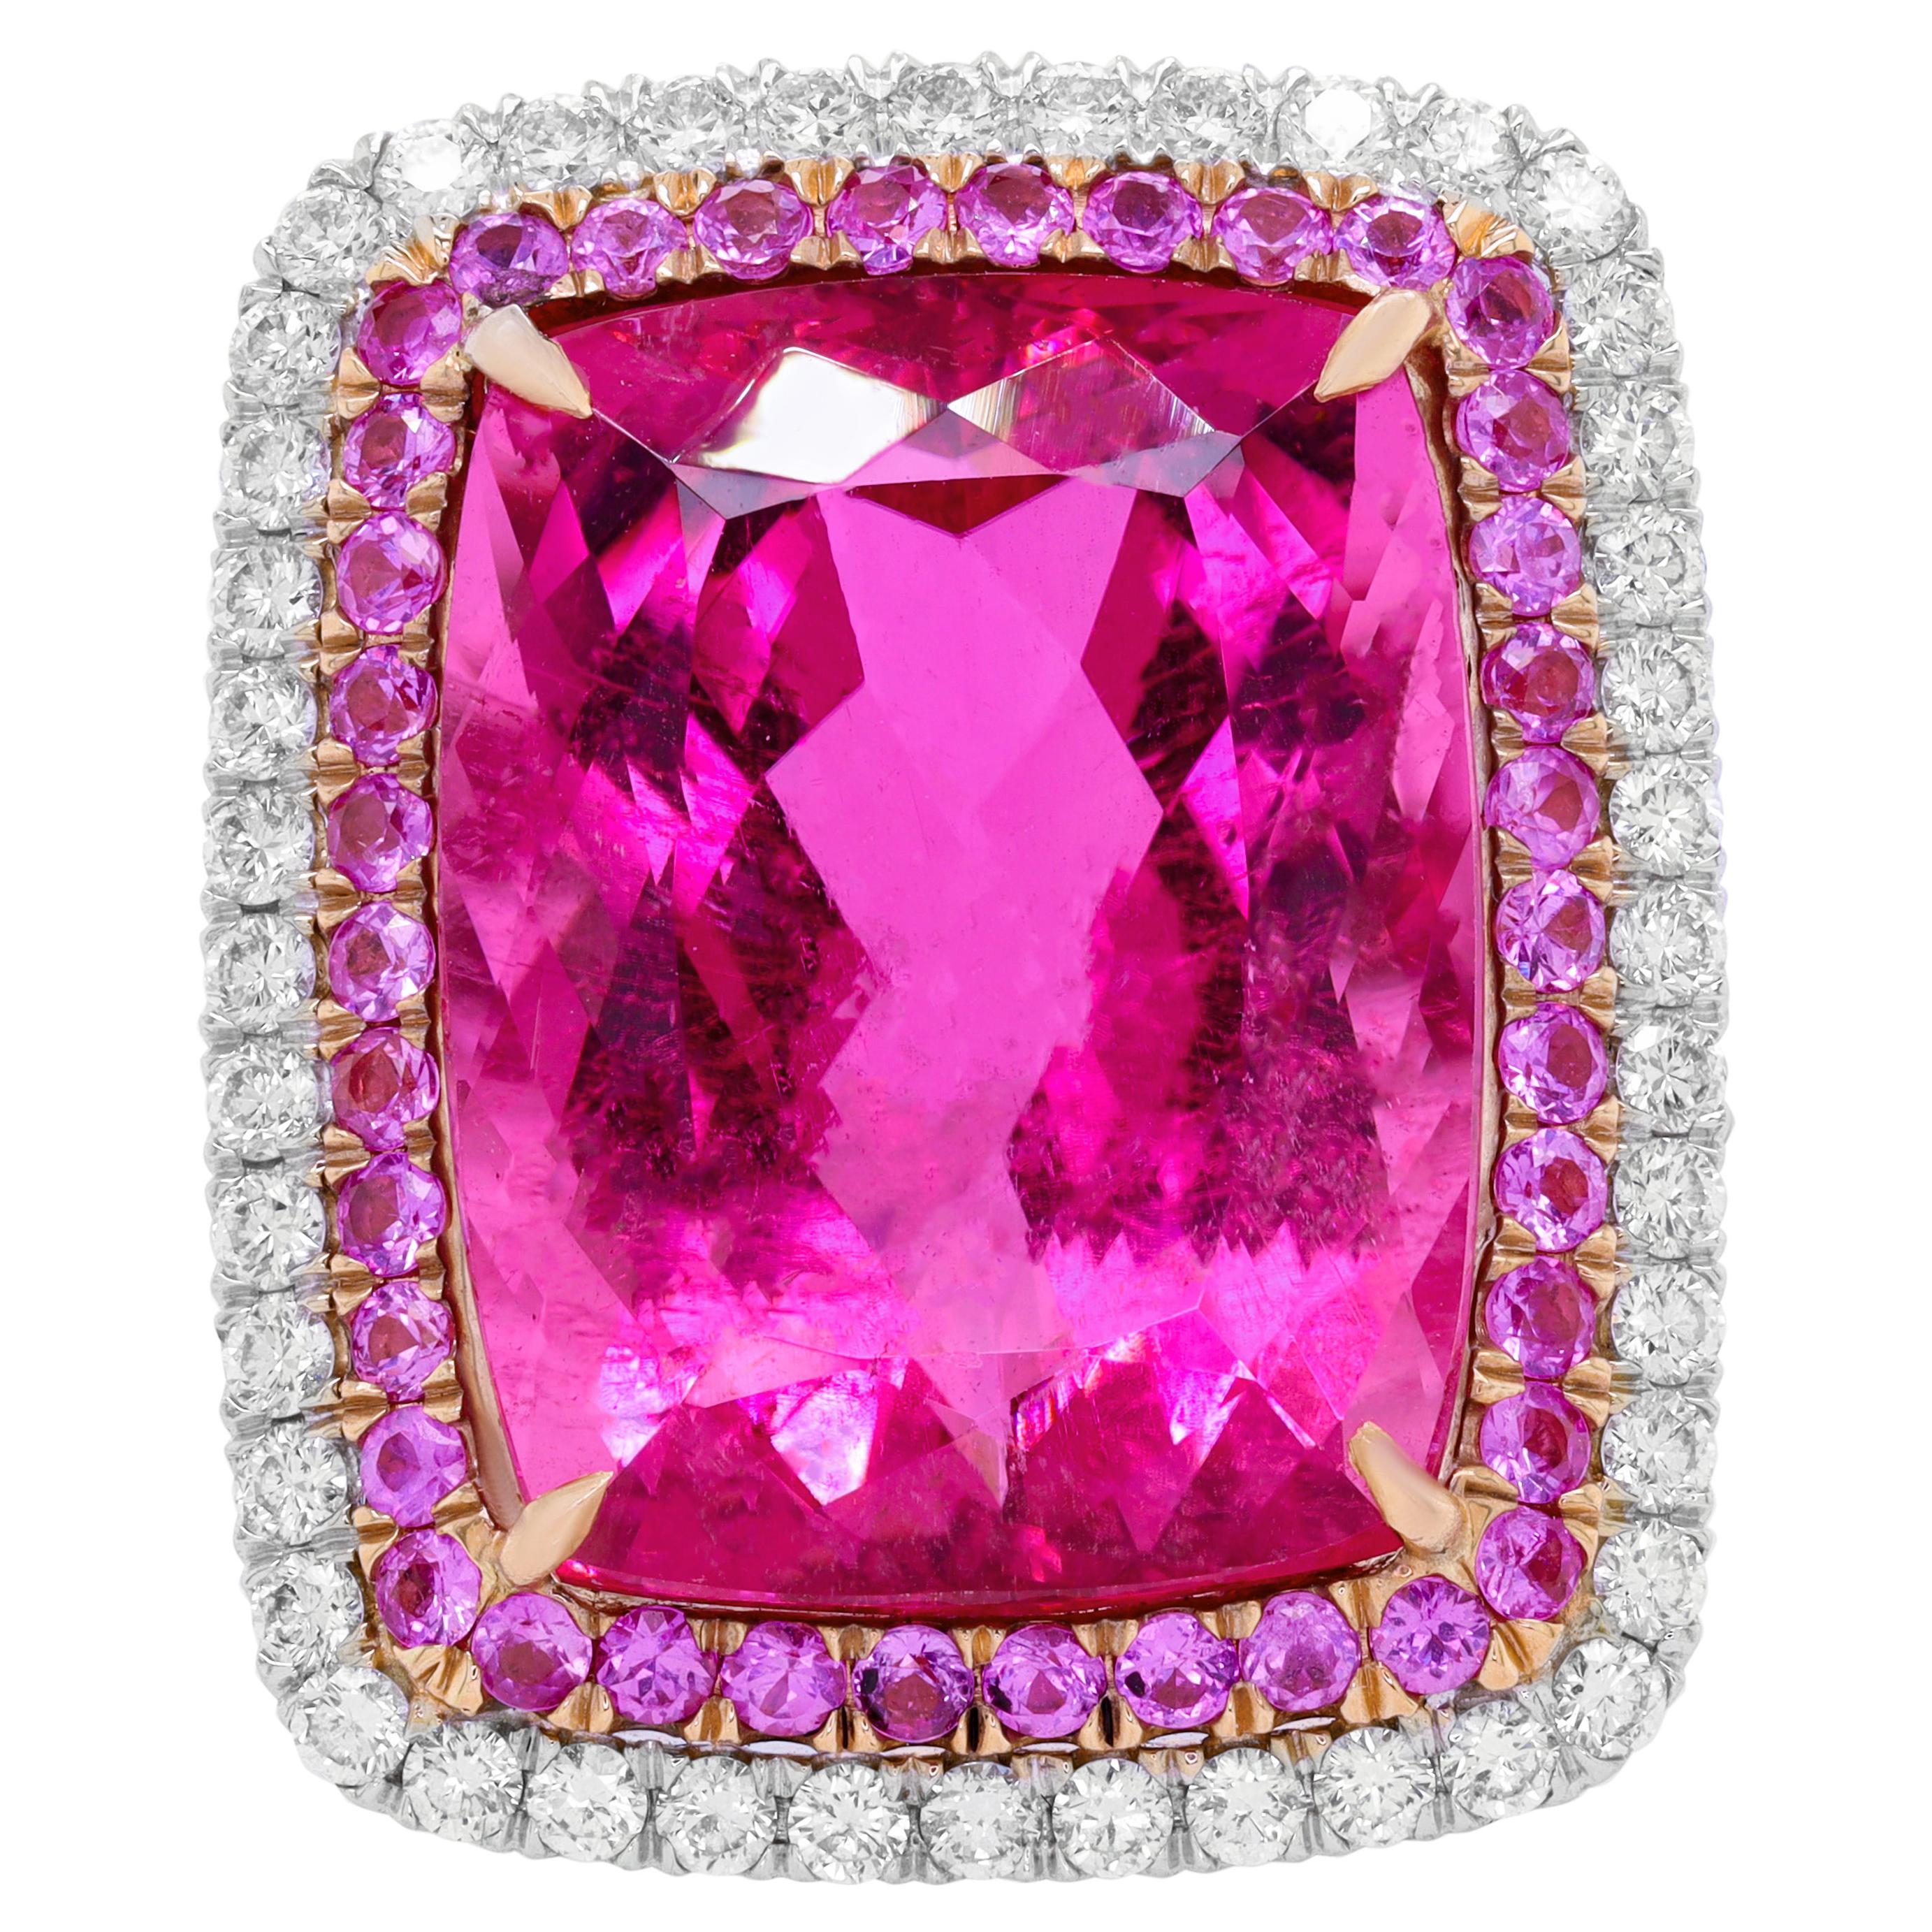 18kt White Gold Magnificent Pink Tourmaline Diamond Ring with Micropave Diamonds